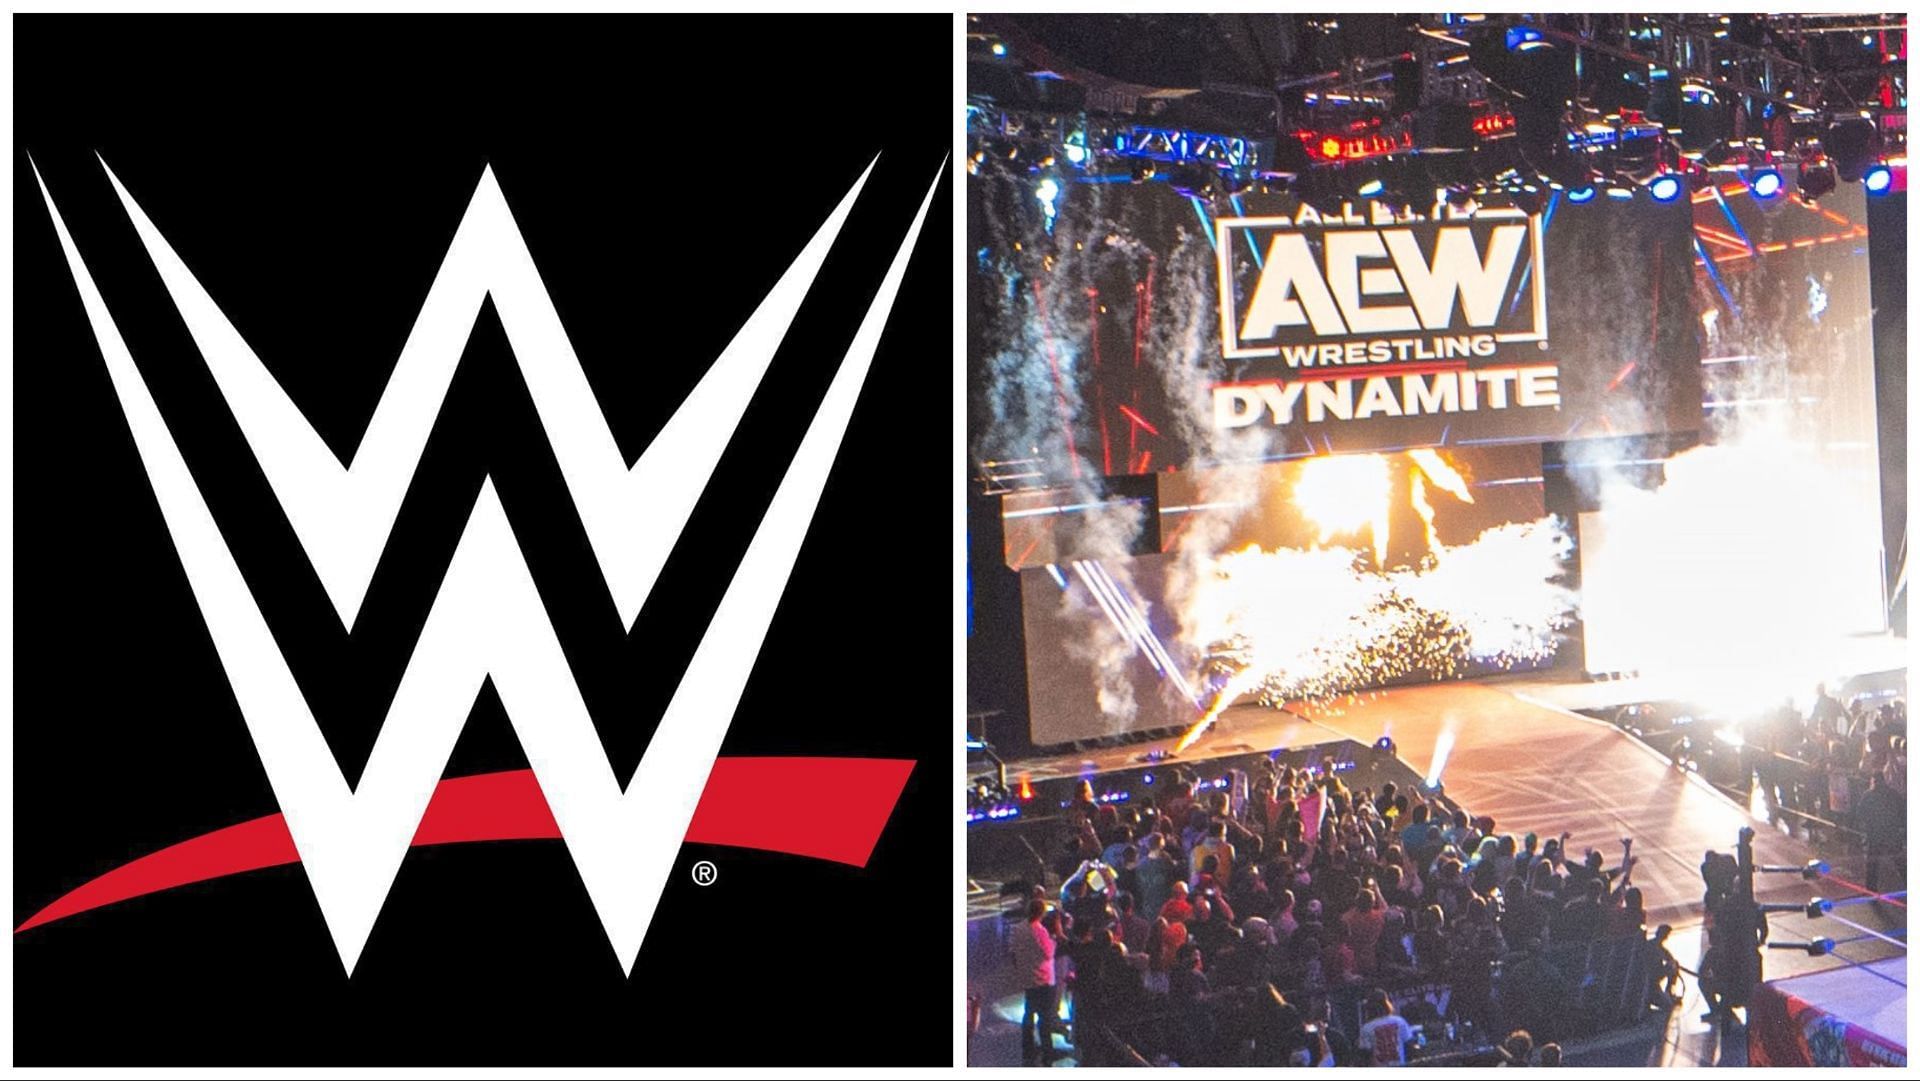 The official WWE logo, AEW fans pack arena for a live Dynamite